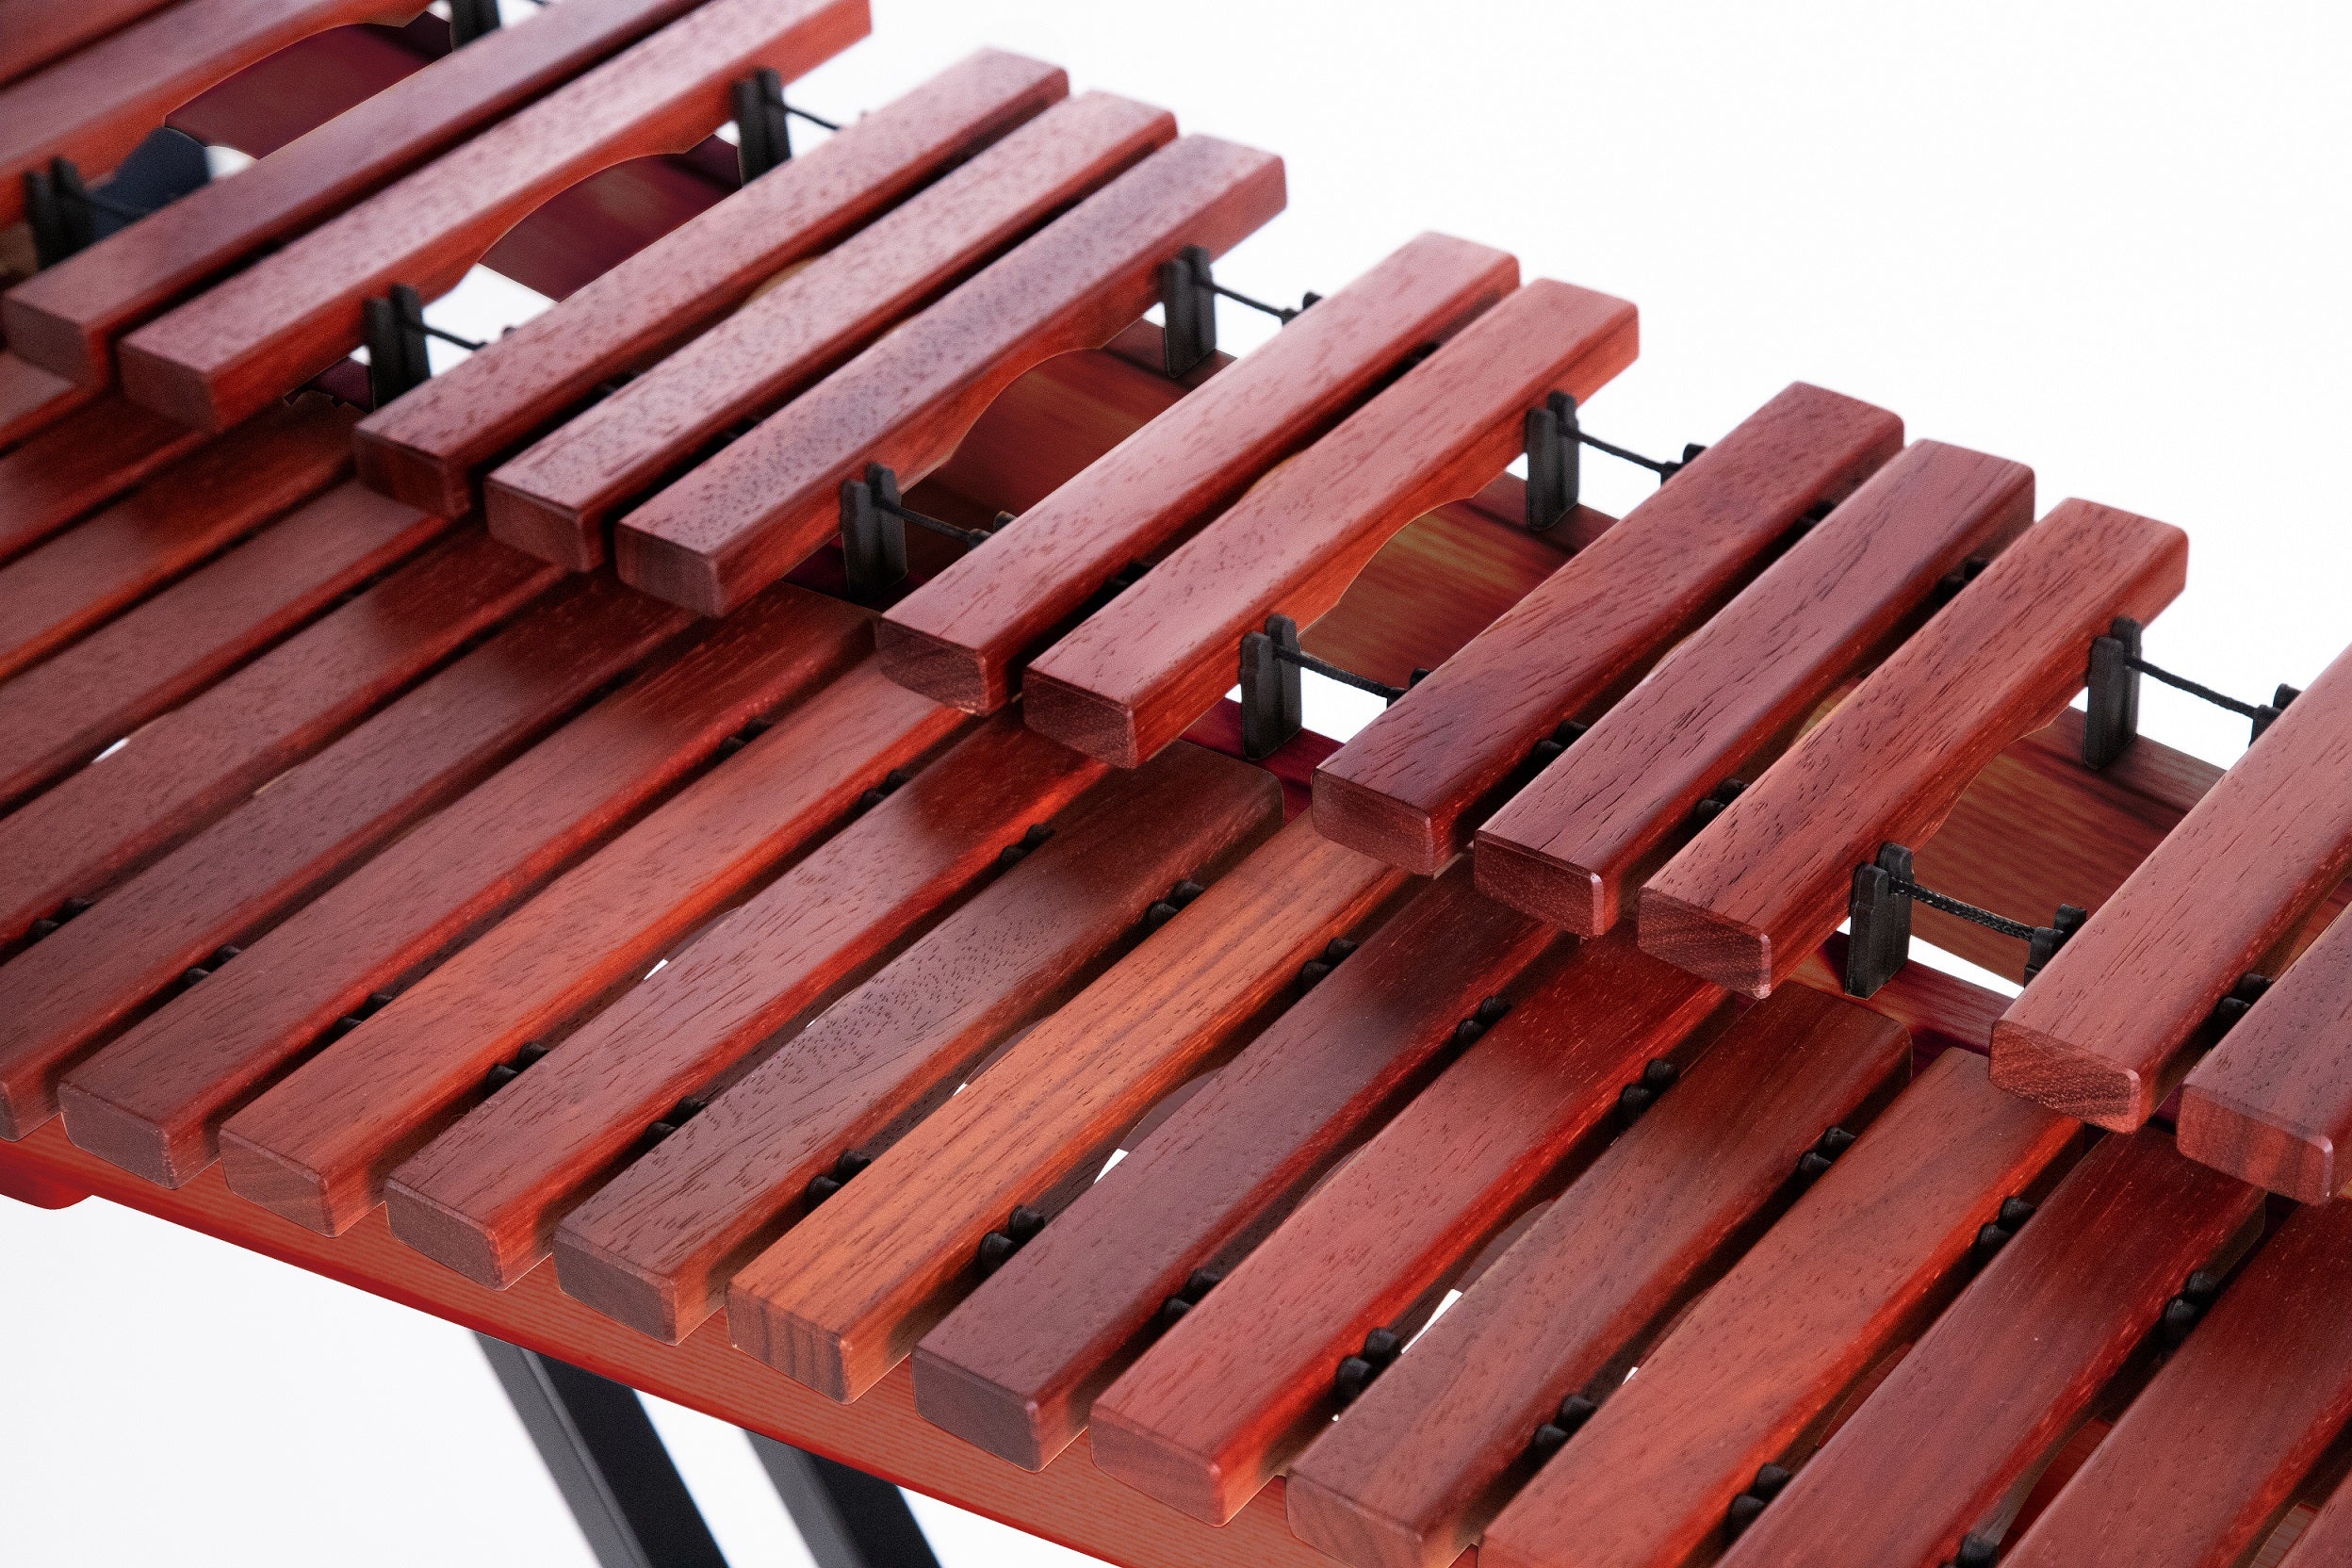 Fujiyama 3.0 Octaves Desktop Xylophone with X-style Stand